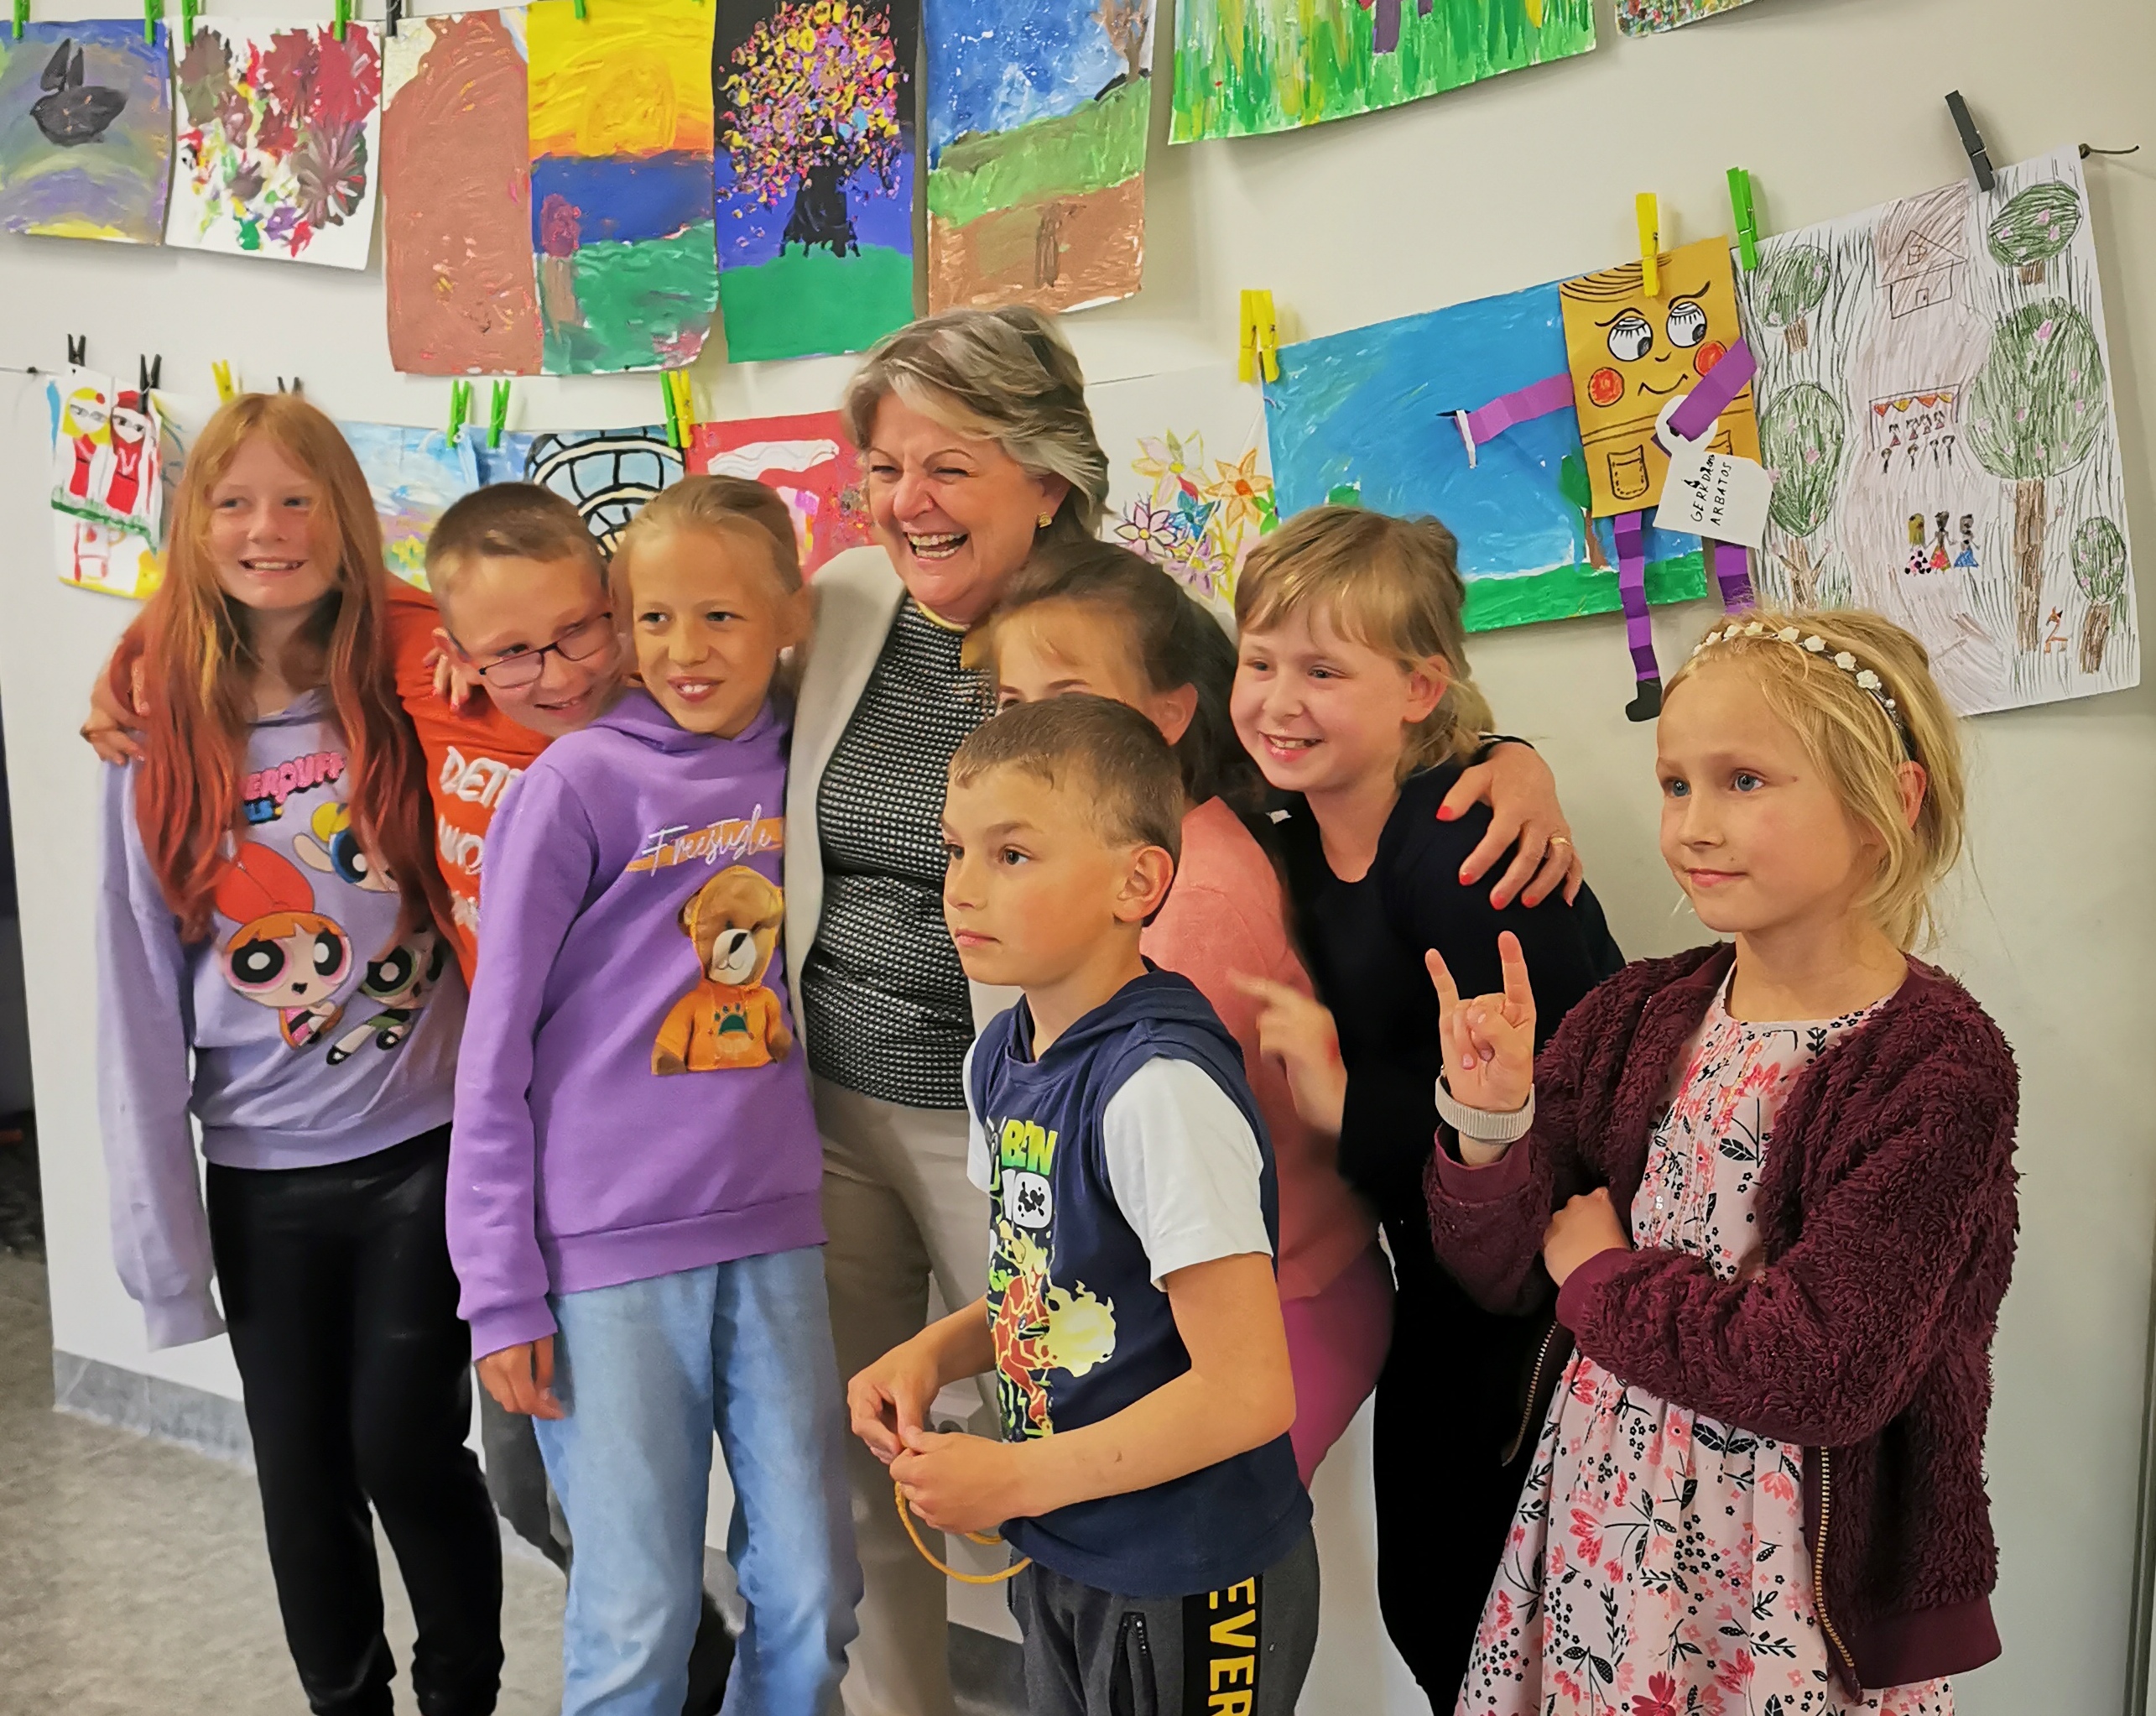 Elisa Ferreira, European Commissioner, during her visit in a school in Lithuania